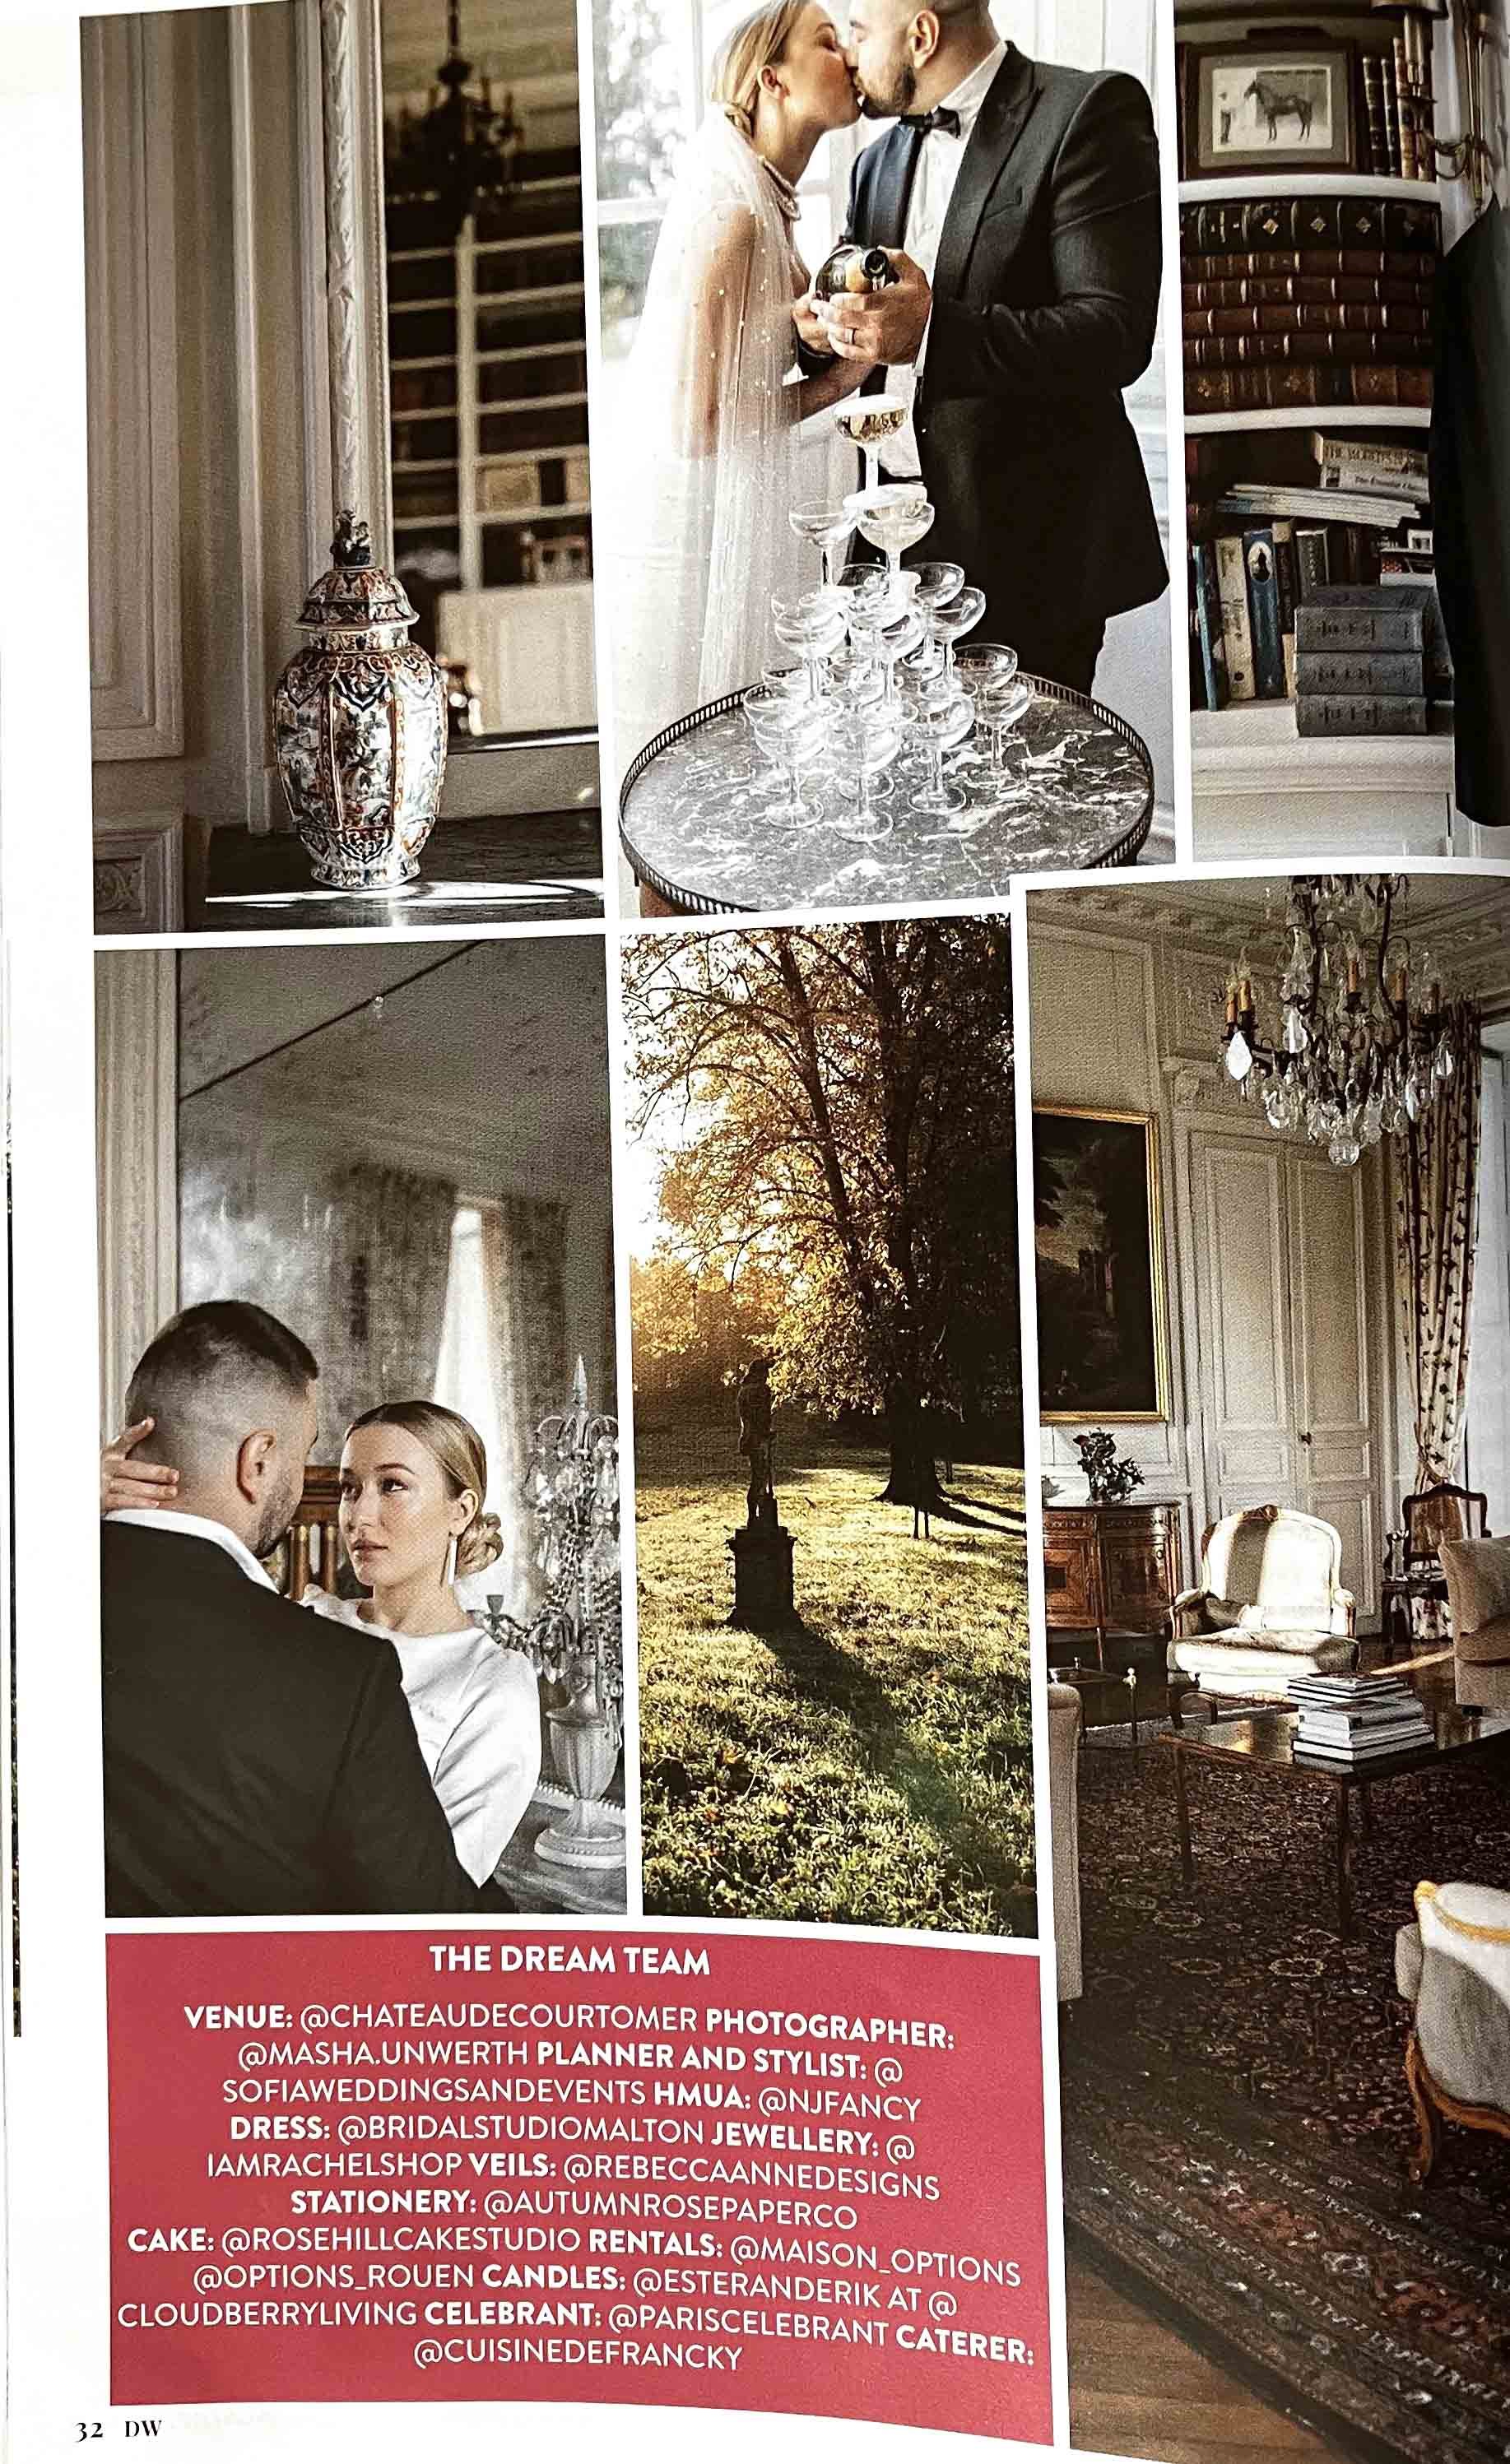 A magazine spread with pictures of a French chateau wedding including a bride and groom kissing next to a champagne tower.